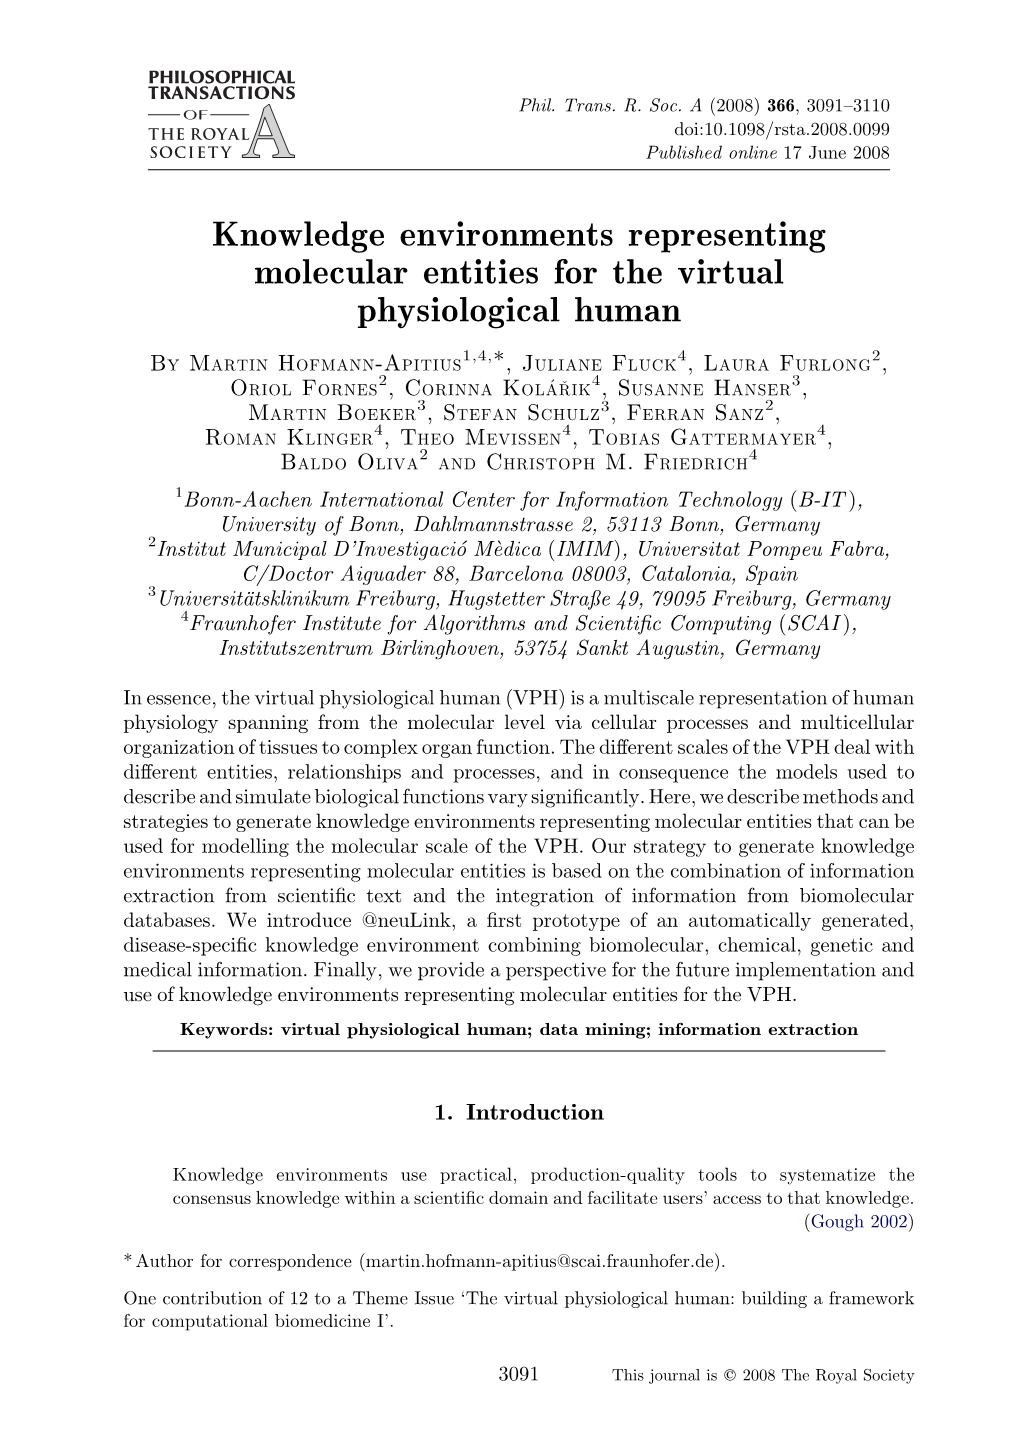 Knowledge Environments Representing Molecular Entities for the Virtual Physiological Human